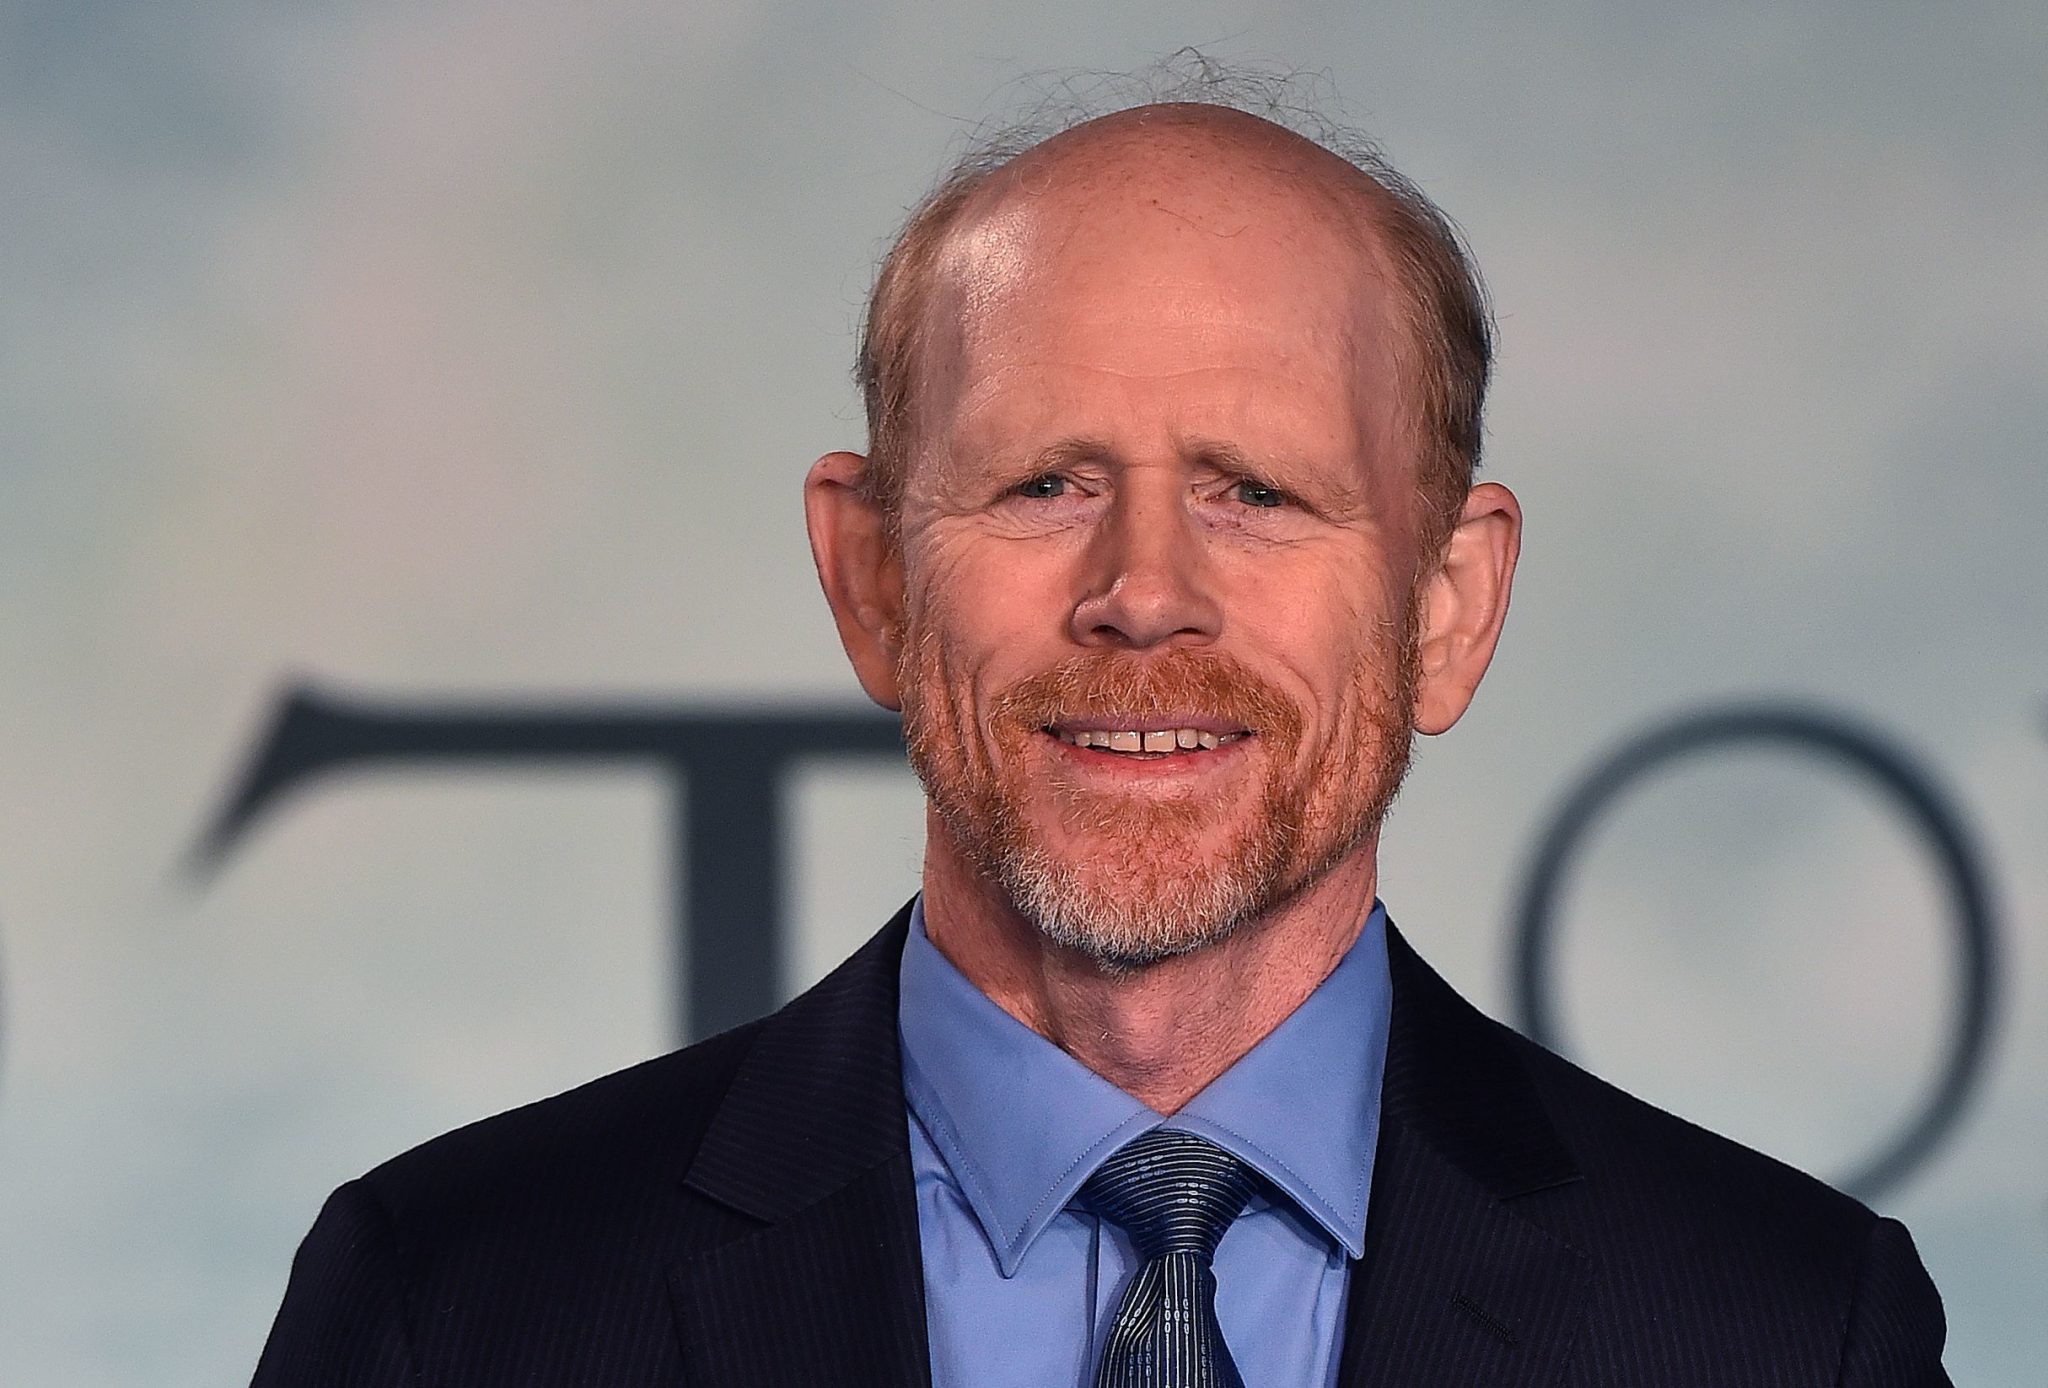 Ron Howard Takes Over Directing Duties for Han Solo Movie [UPDATED]